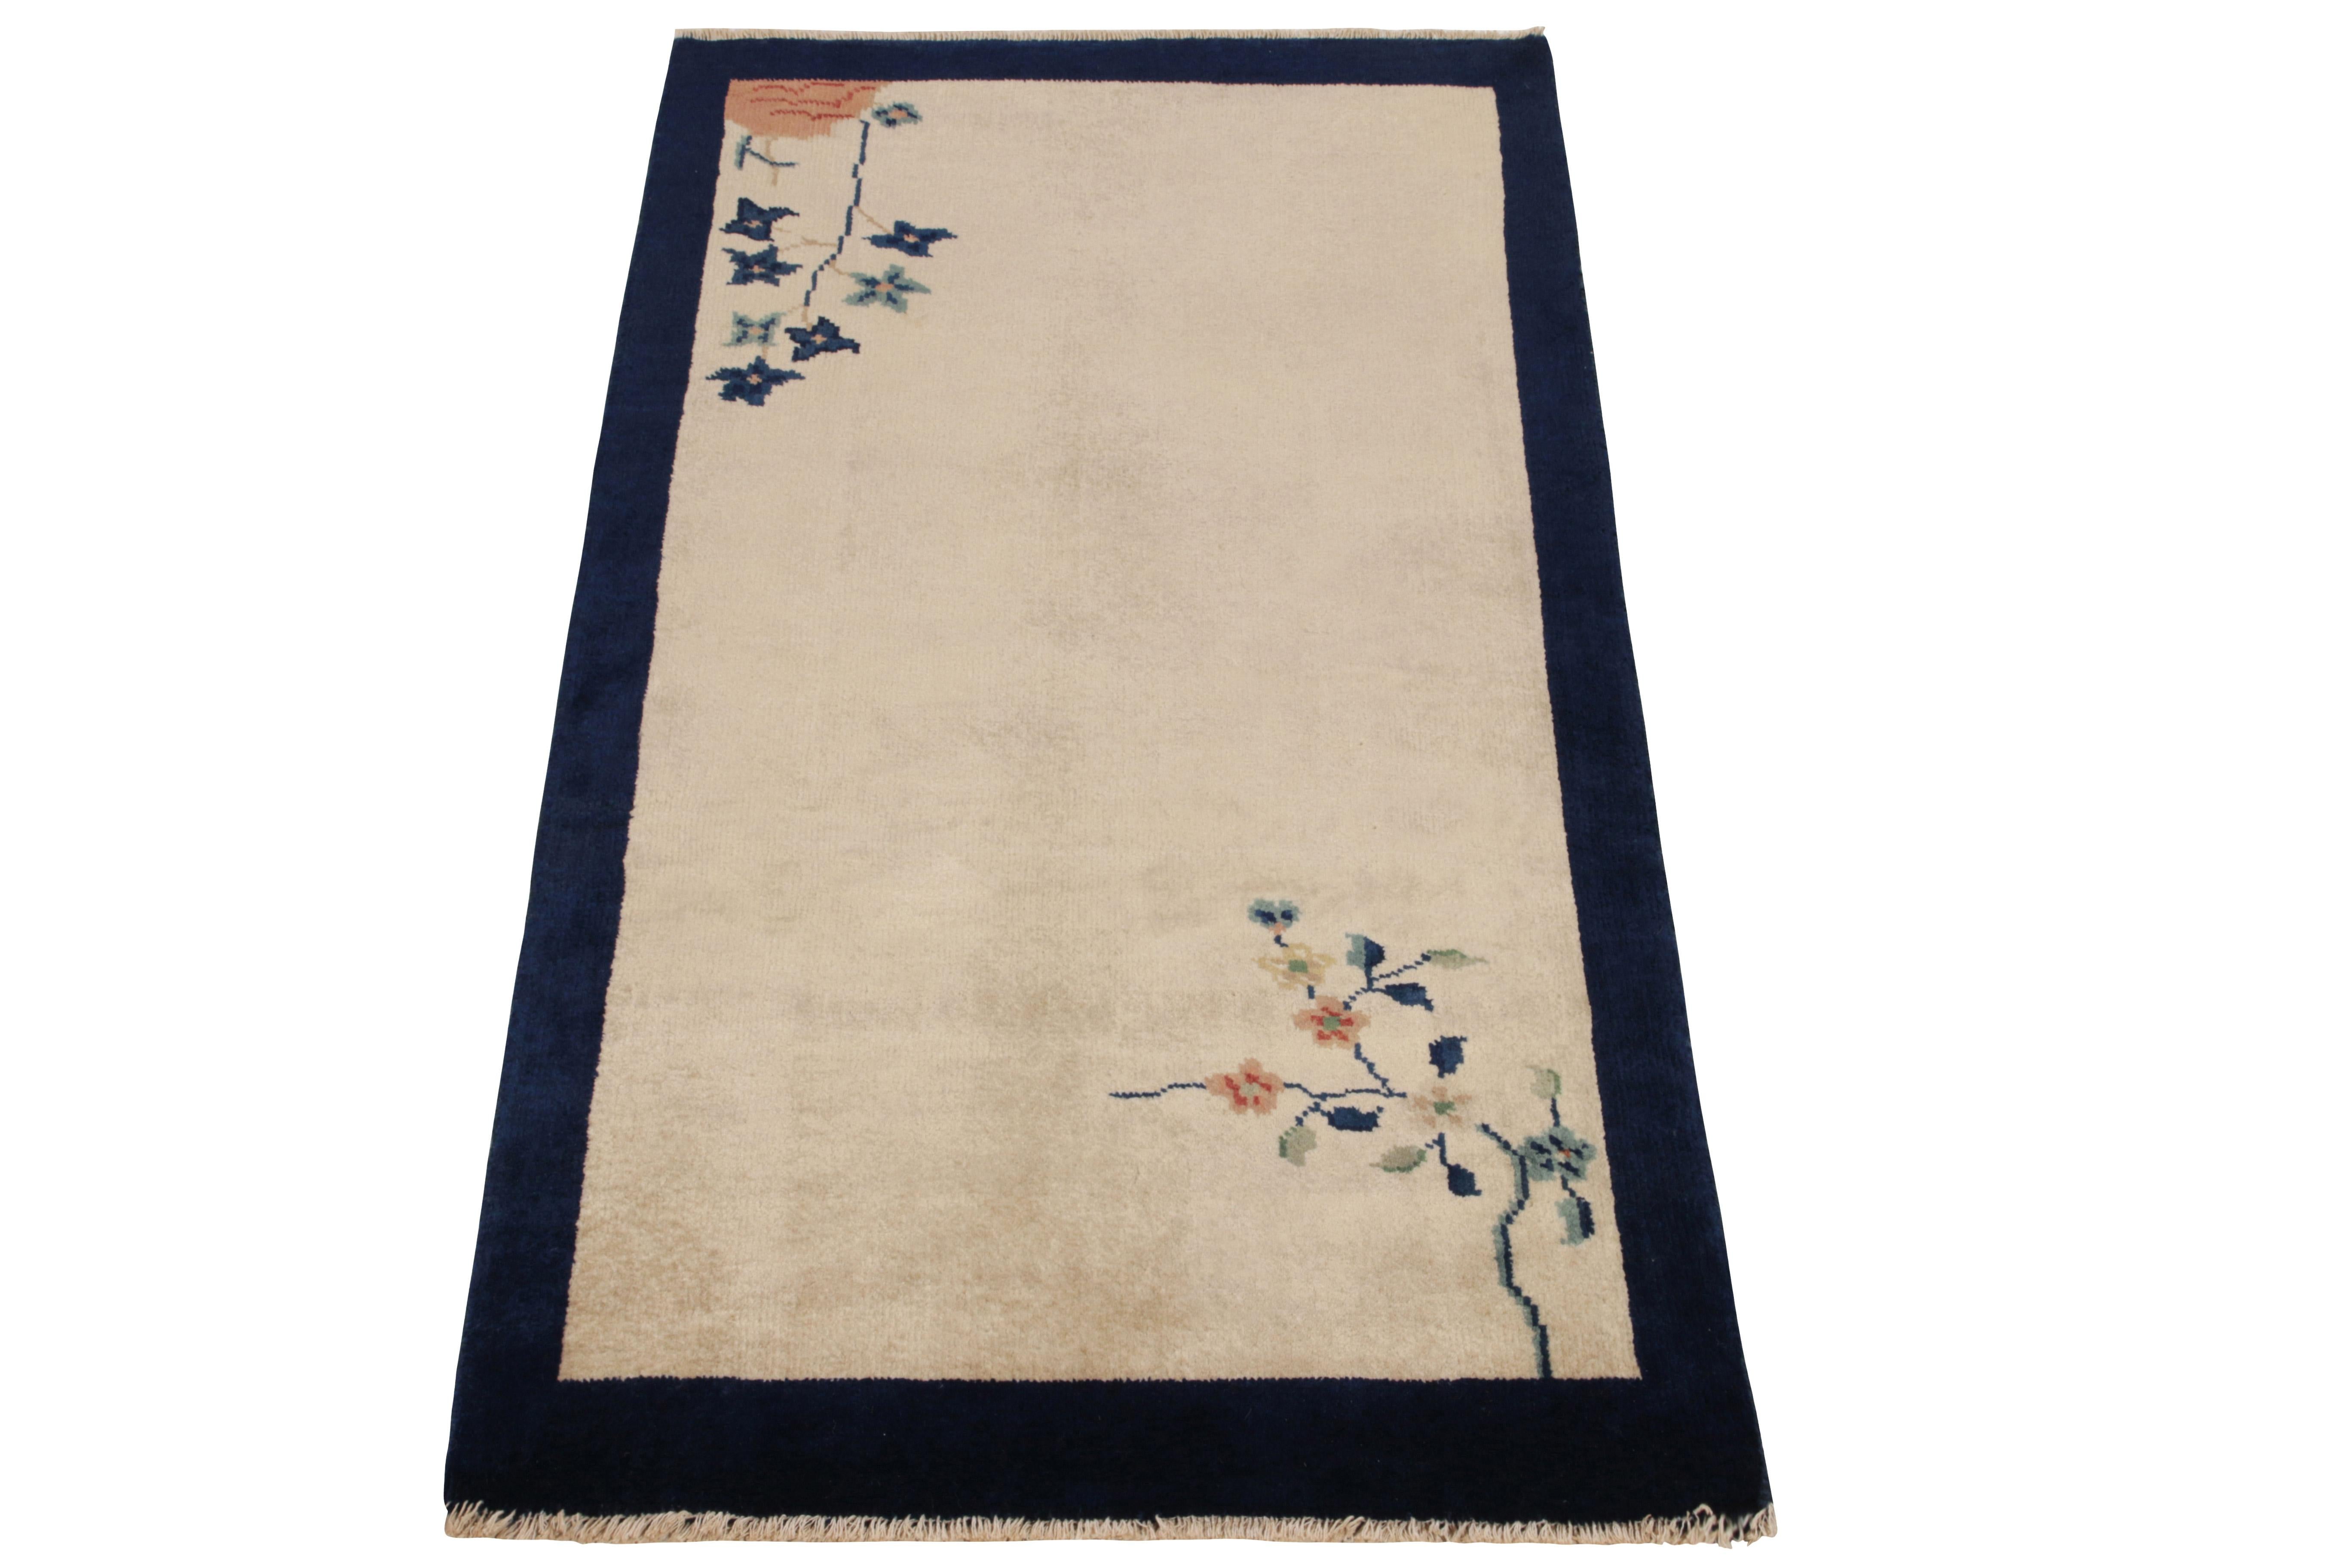 Hand-knotted in wool, this 2x4 vintage ode to Chinese art deco rugs of the 1920s features flowers flourishing in delicious hues of rich blue, reddish orange & pastel green in diagonal corners of the inner border highlighting the minimalist approach